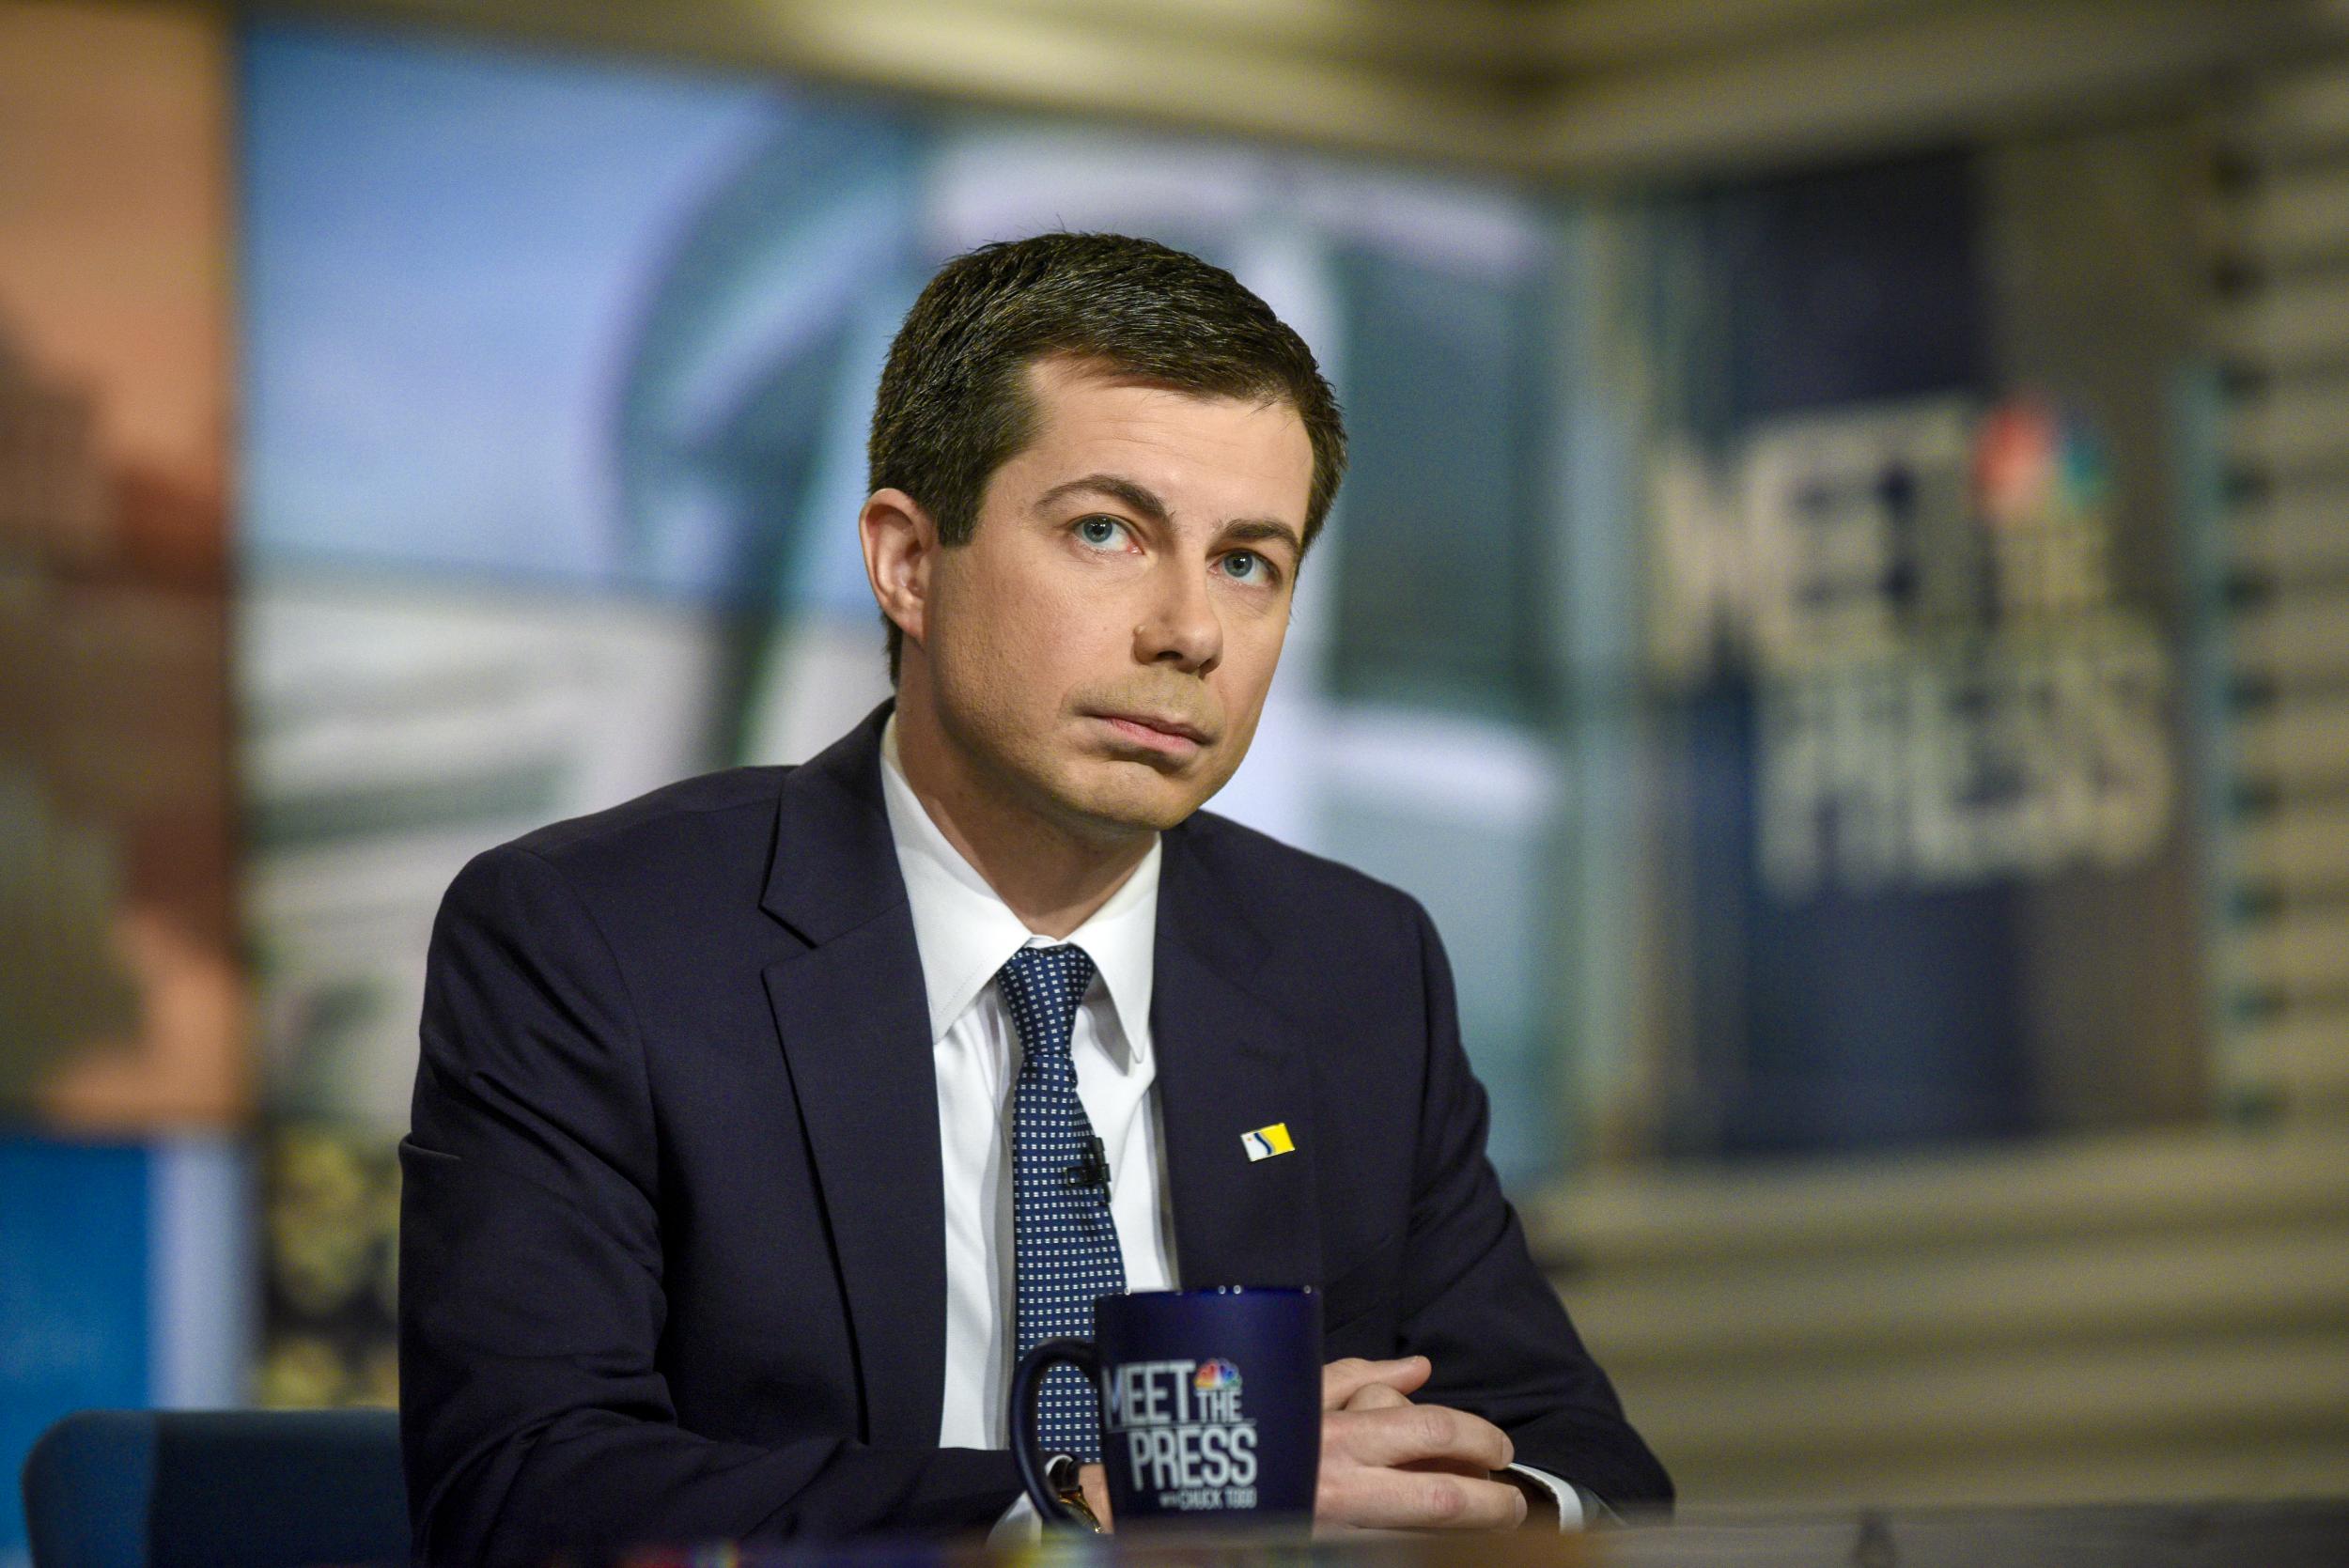 If you're saying Pete Buttigieg 'isn't gay enough,' you are part of the problem